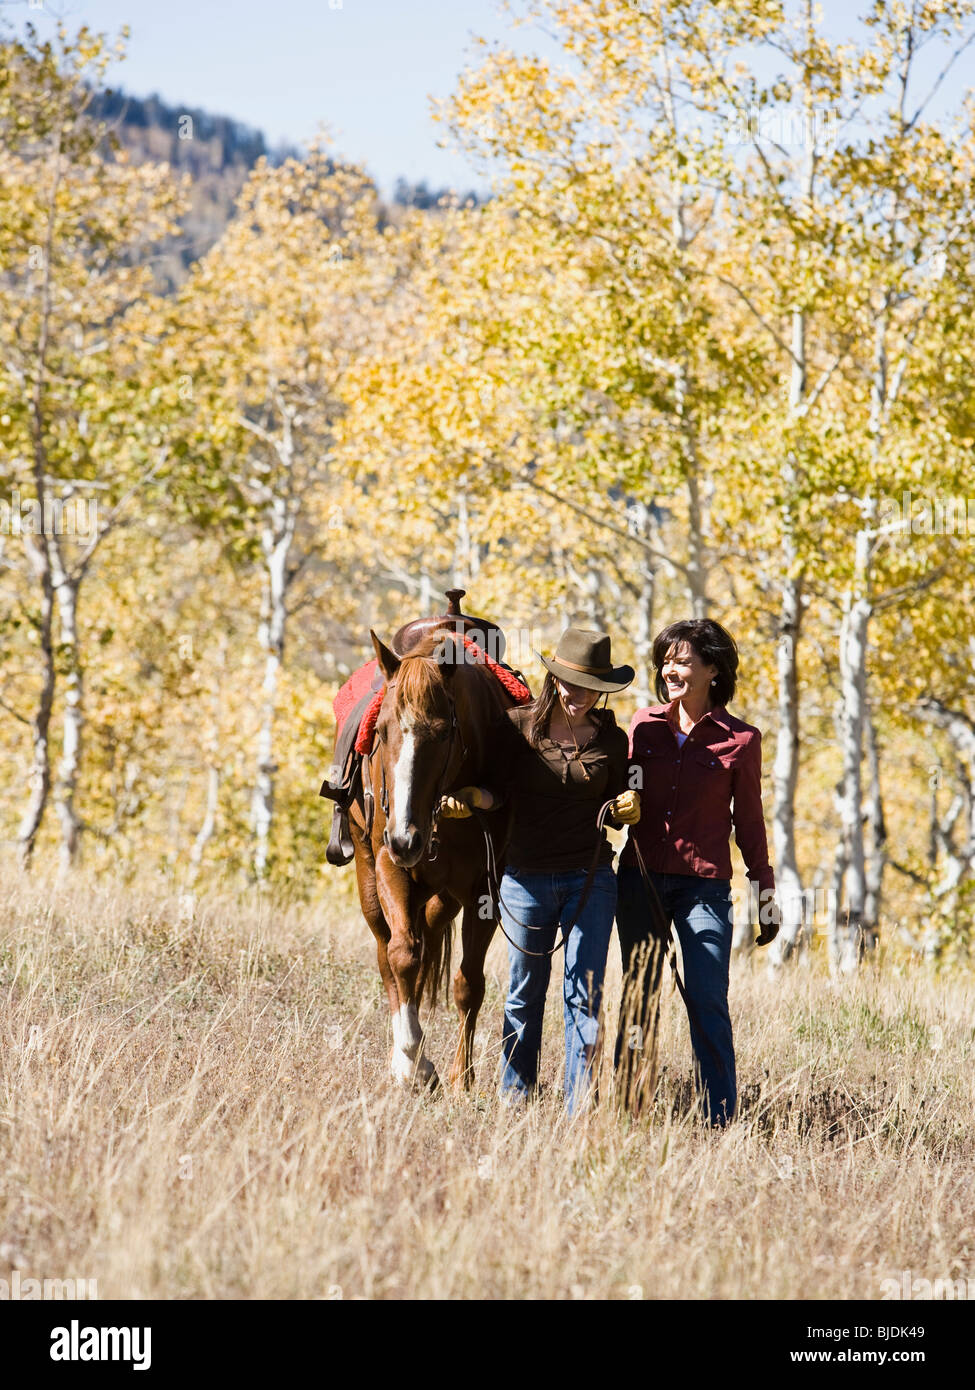 two women with a horse Stock Photo